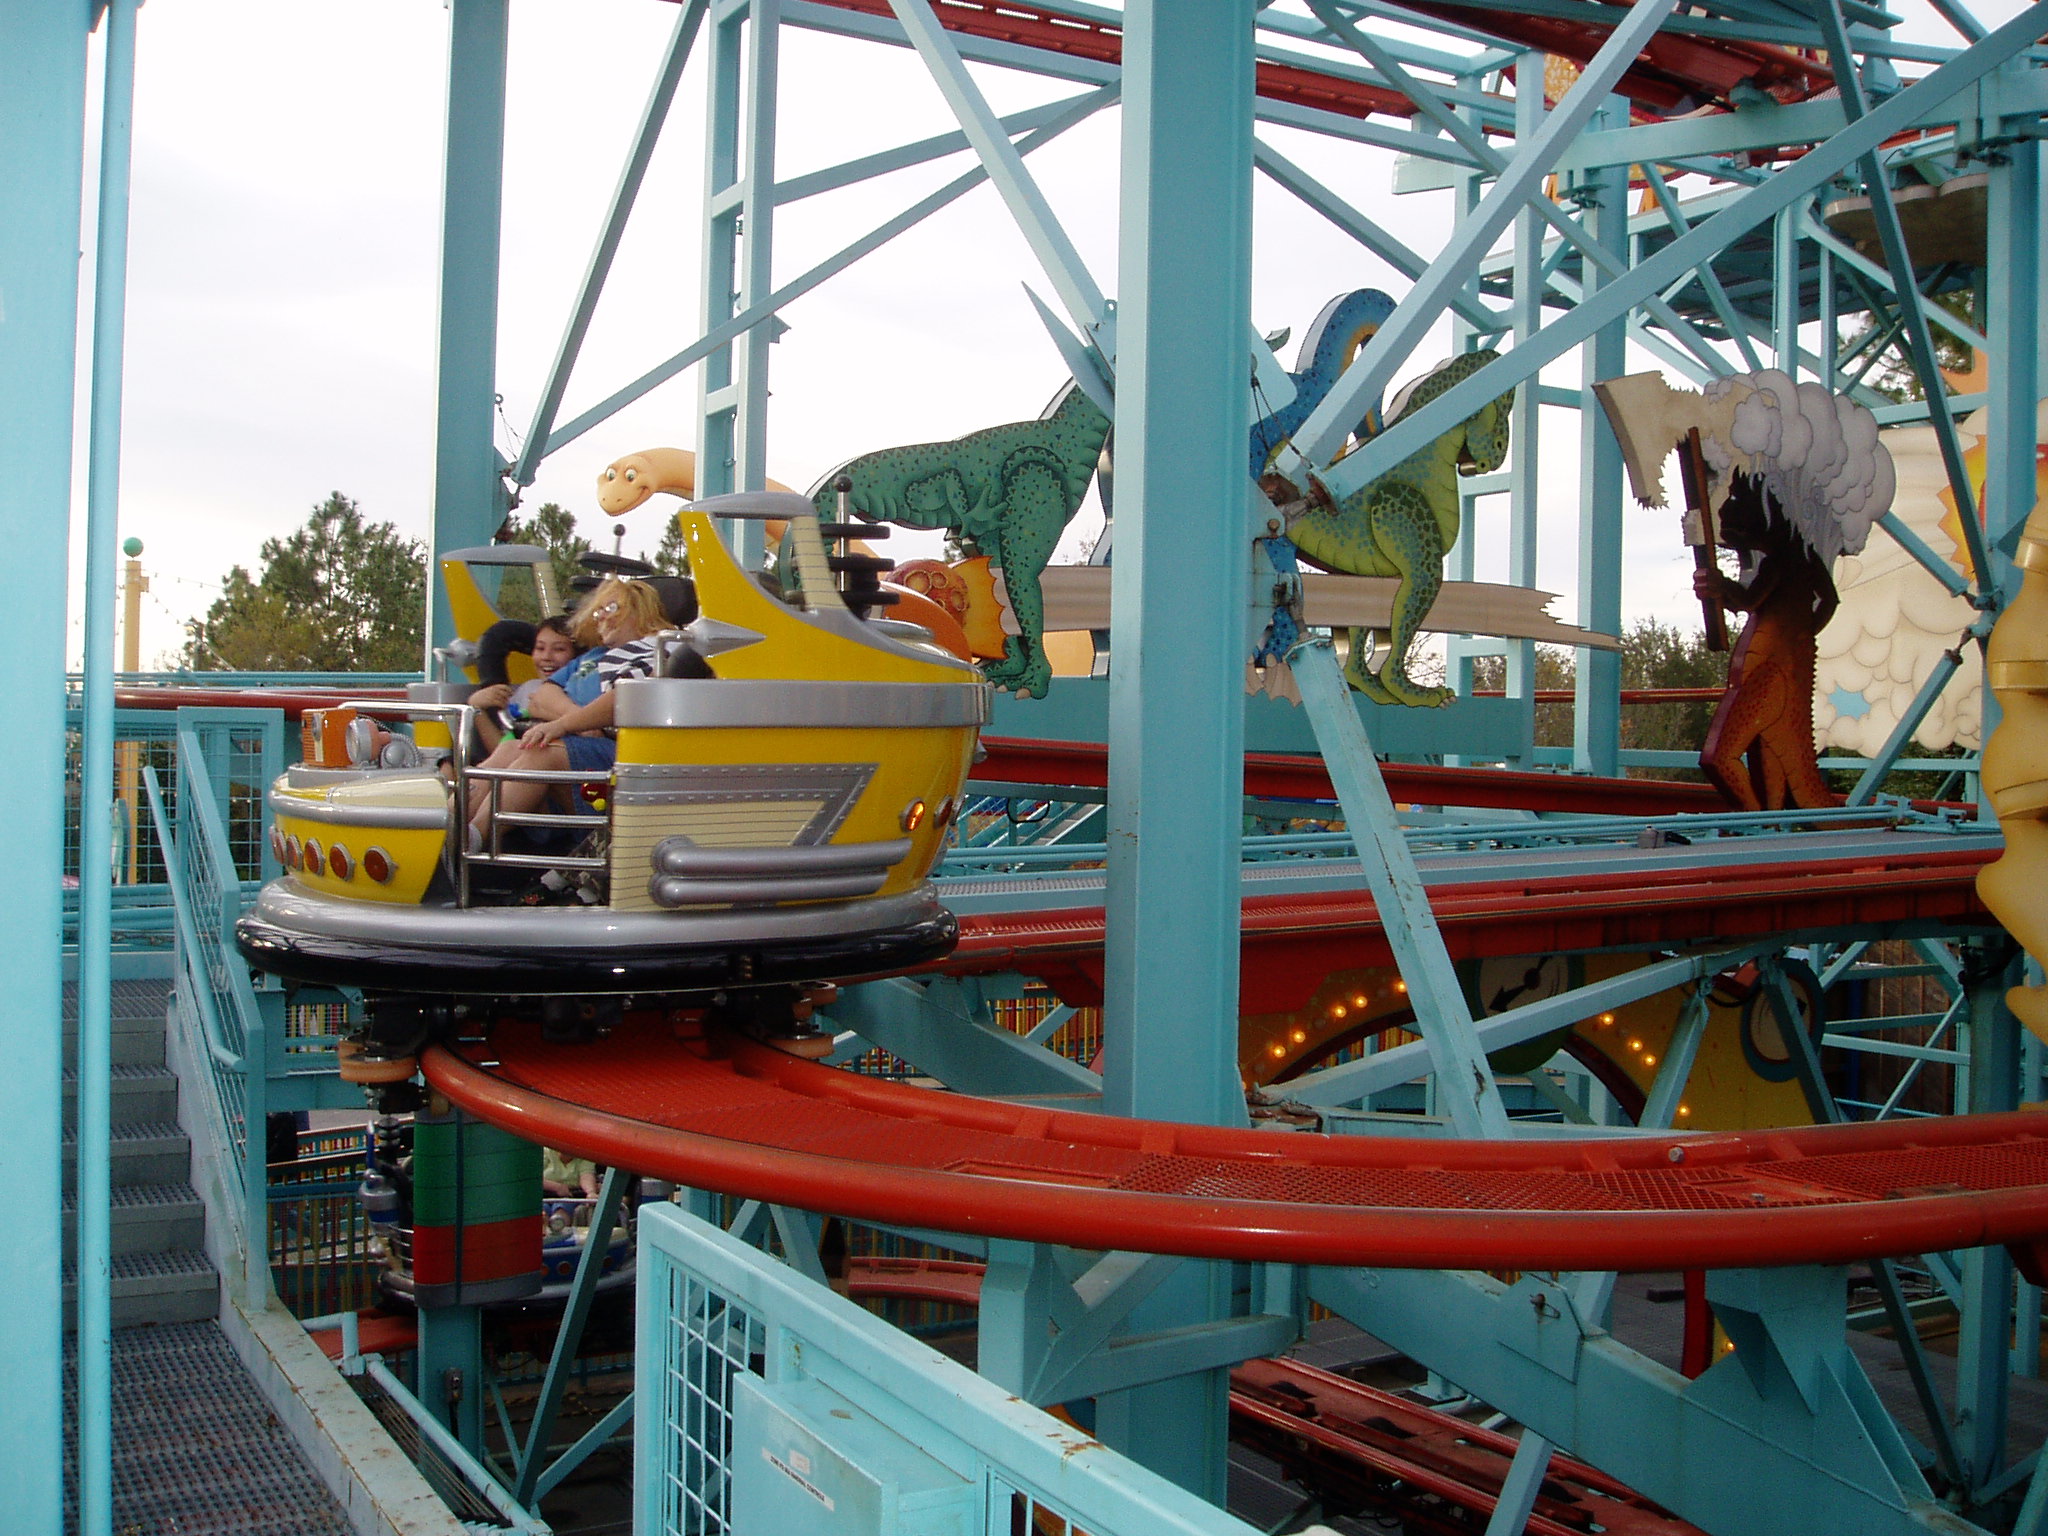 You are currently viewing Primeval Whirl (left) (Disney’s Animal Kingdom)